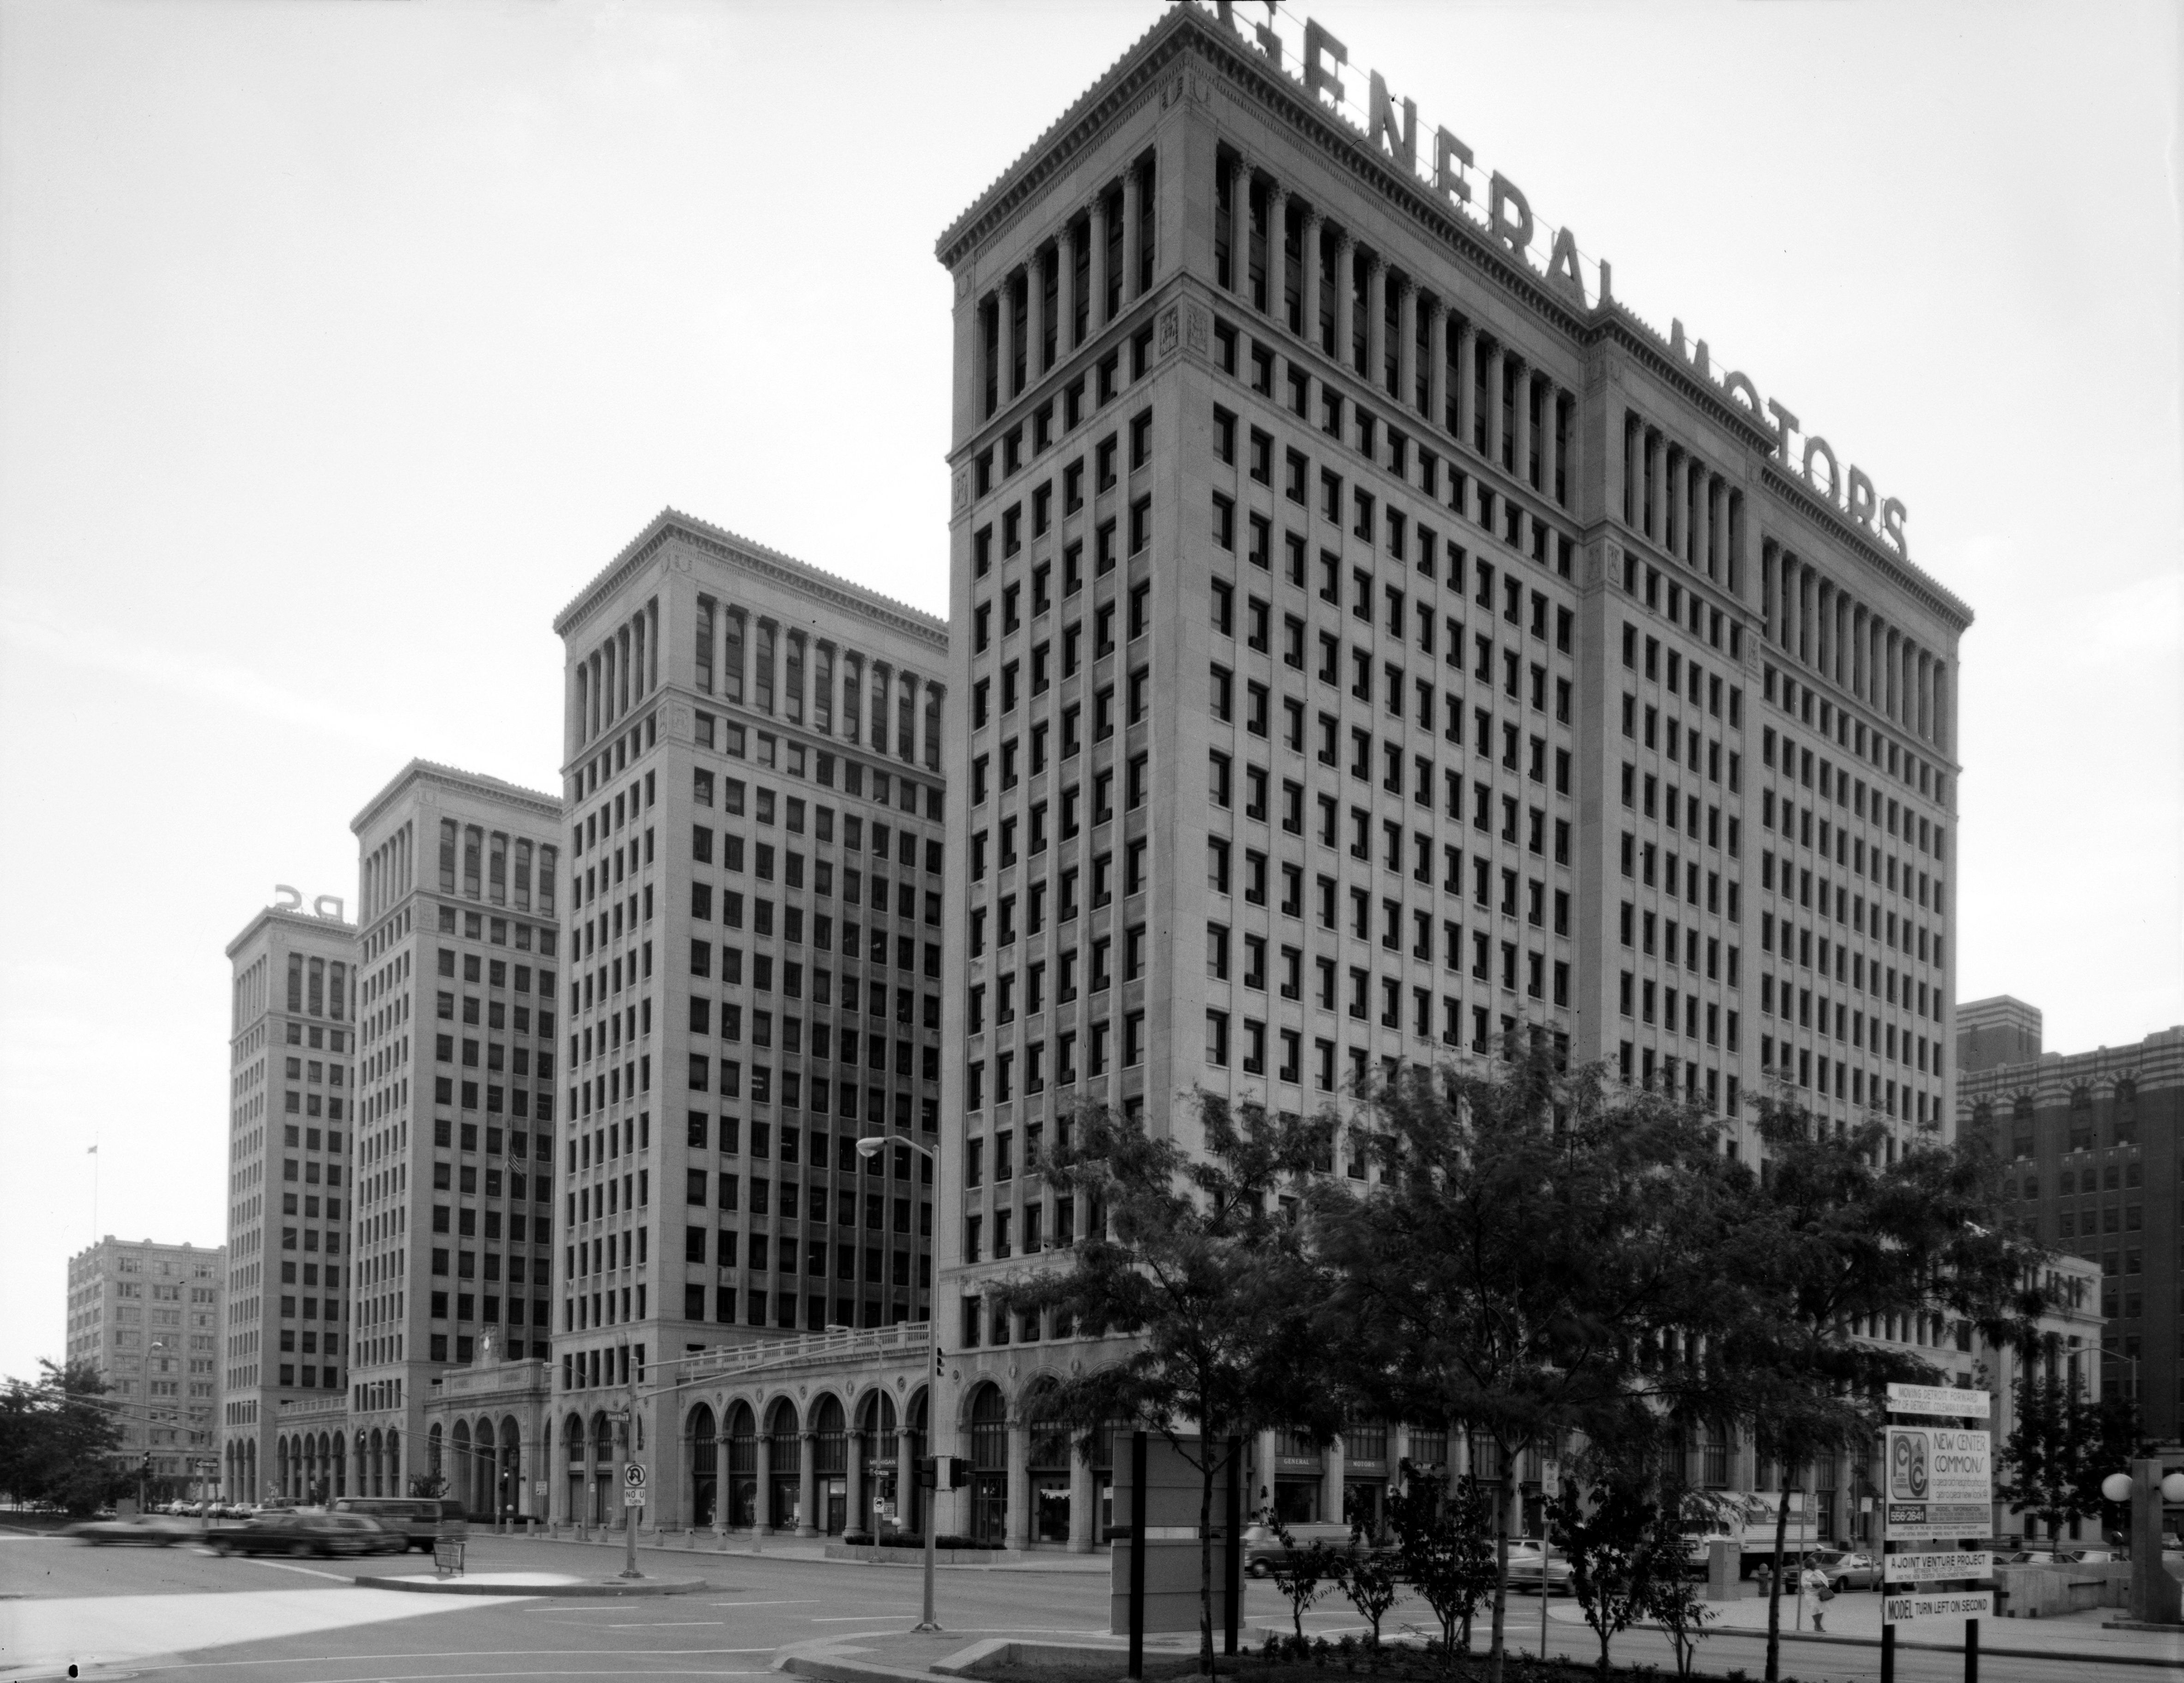 GM's headquarters from 1923 until 1996, a National Historic Landmark, is now Cadillac Place state office building.